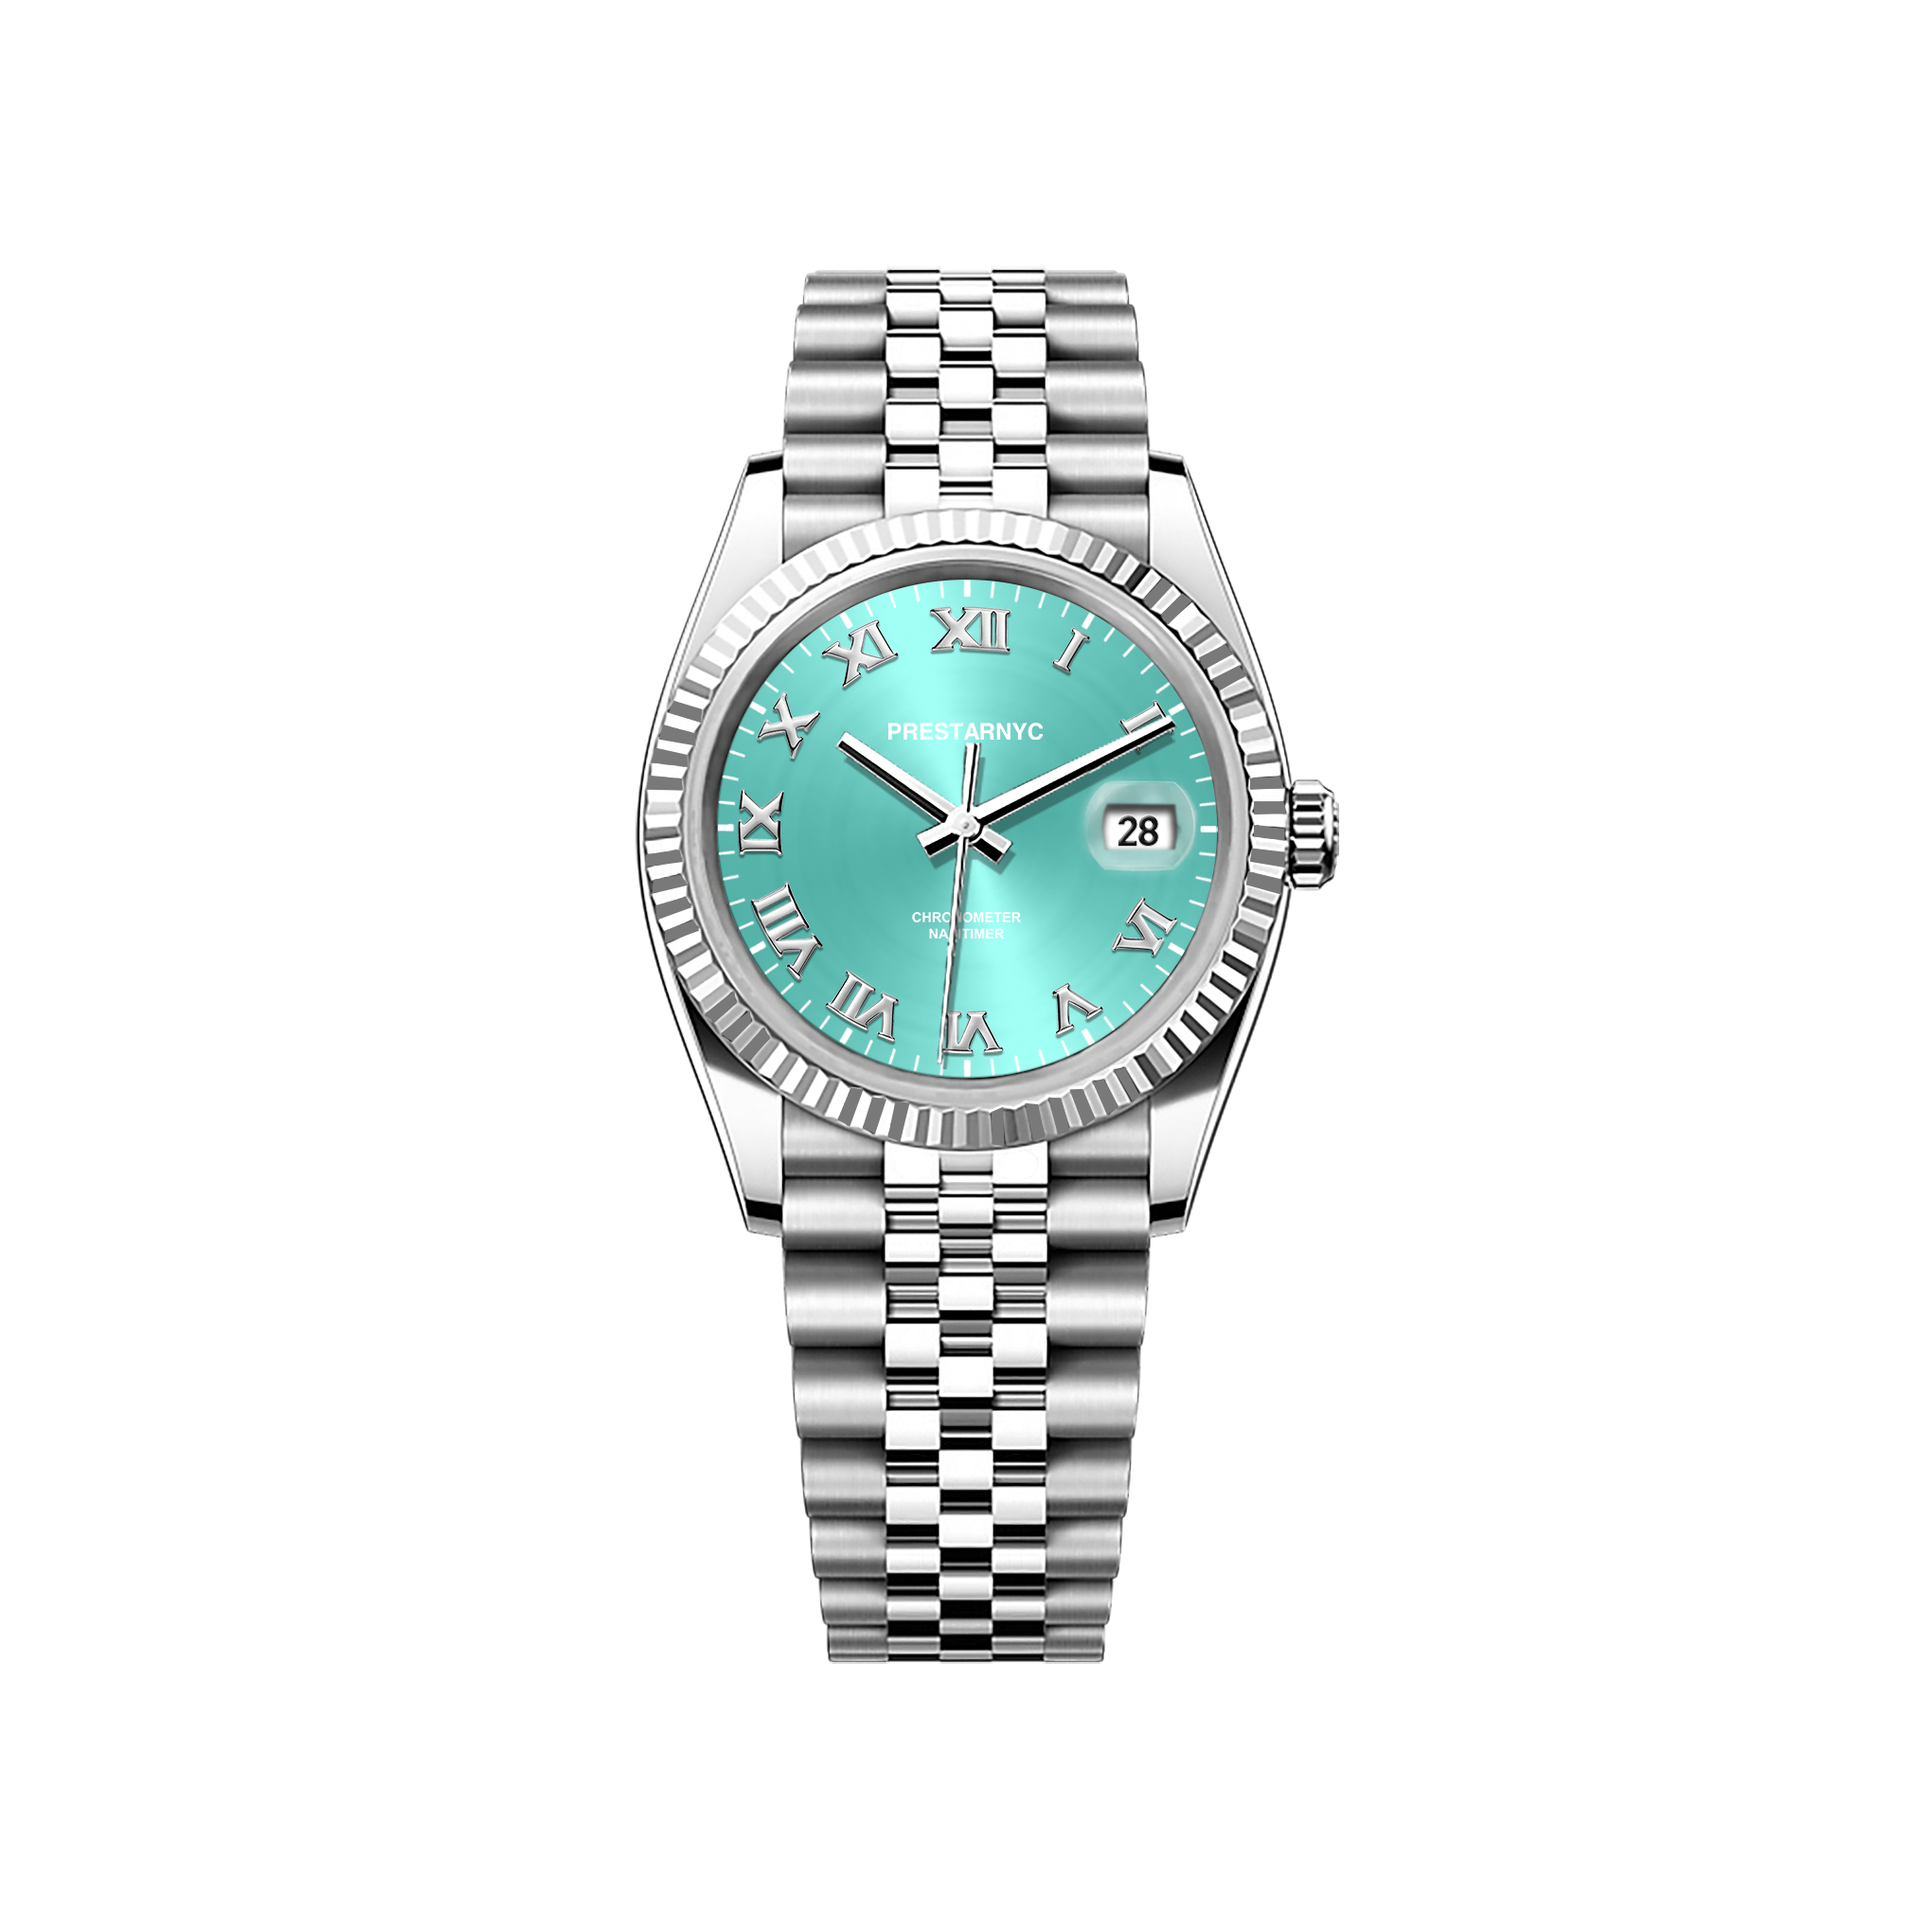 Prestar NYC Diary Classic Basic Watch (Blue Turquoise)